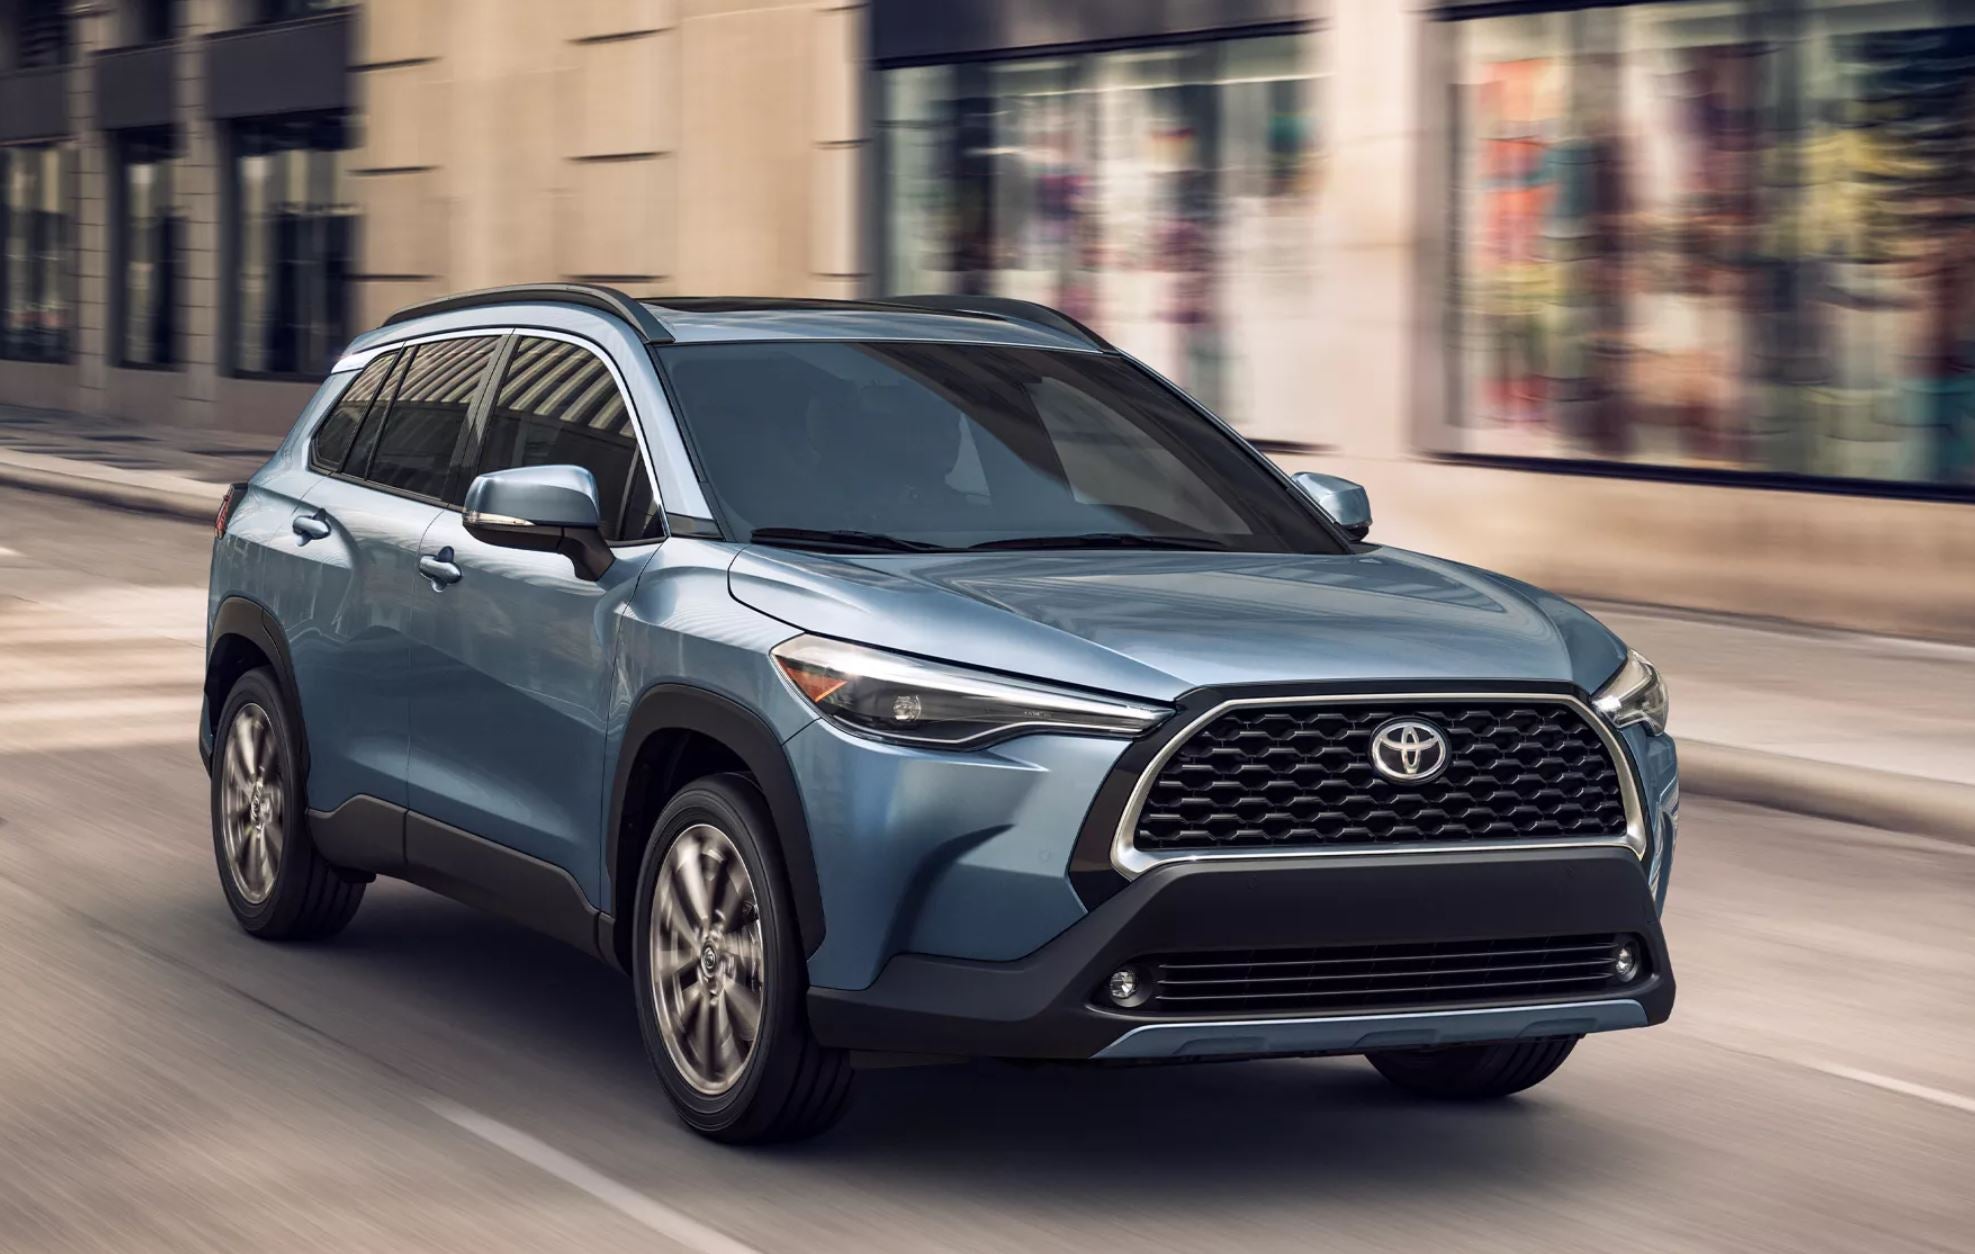 New 2022 Toyota Corolla Cross Now Available at Falmouth Toyota, Bourne, MA - Cape Cod Toyota Dealership